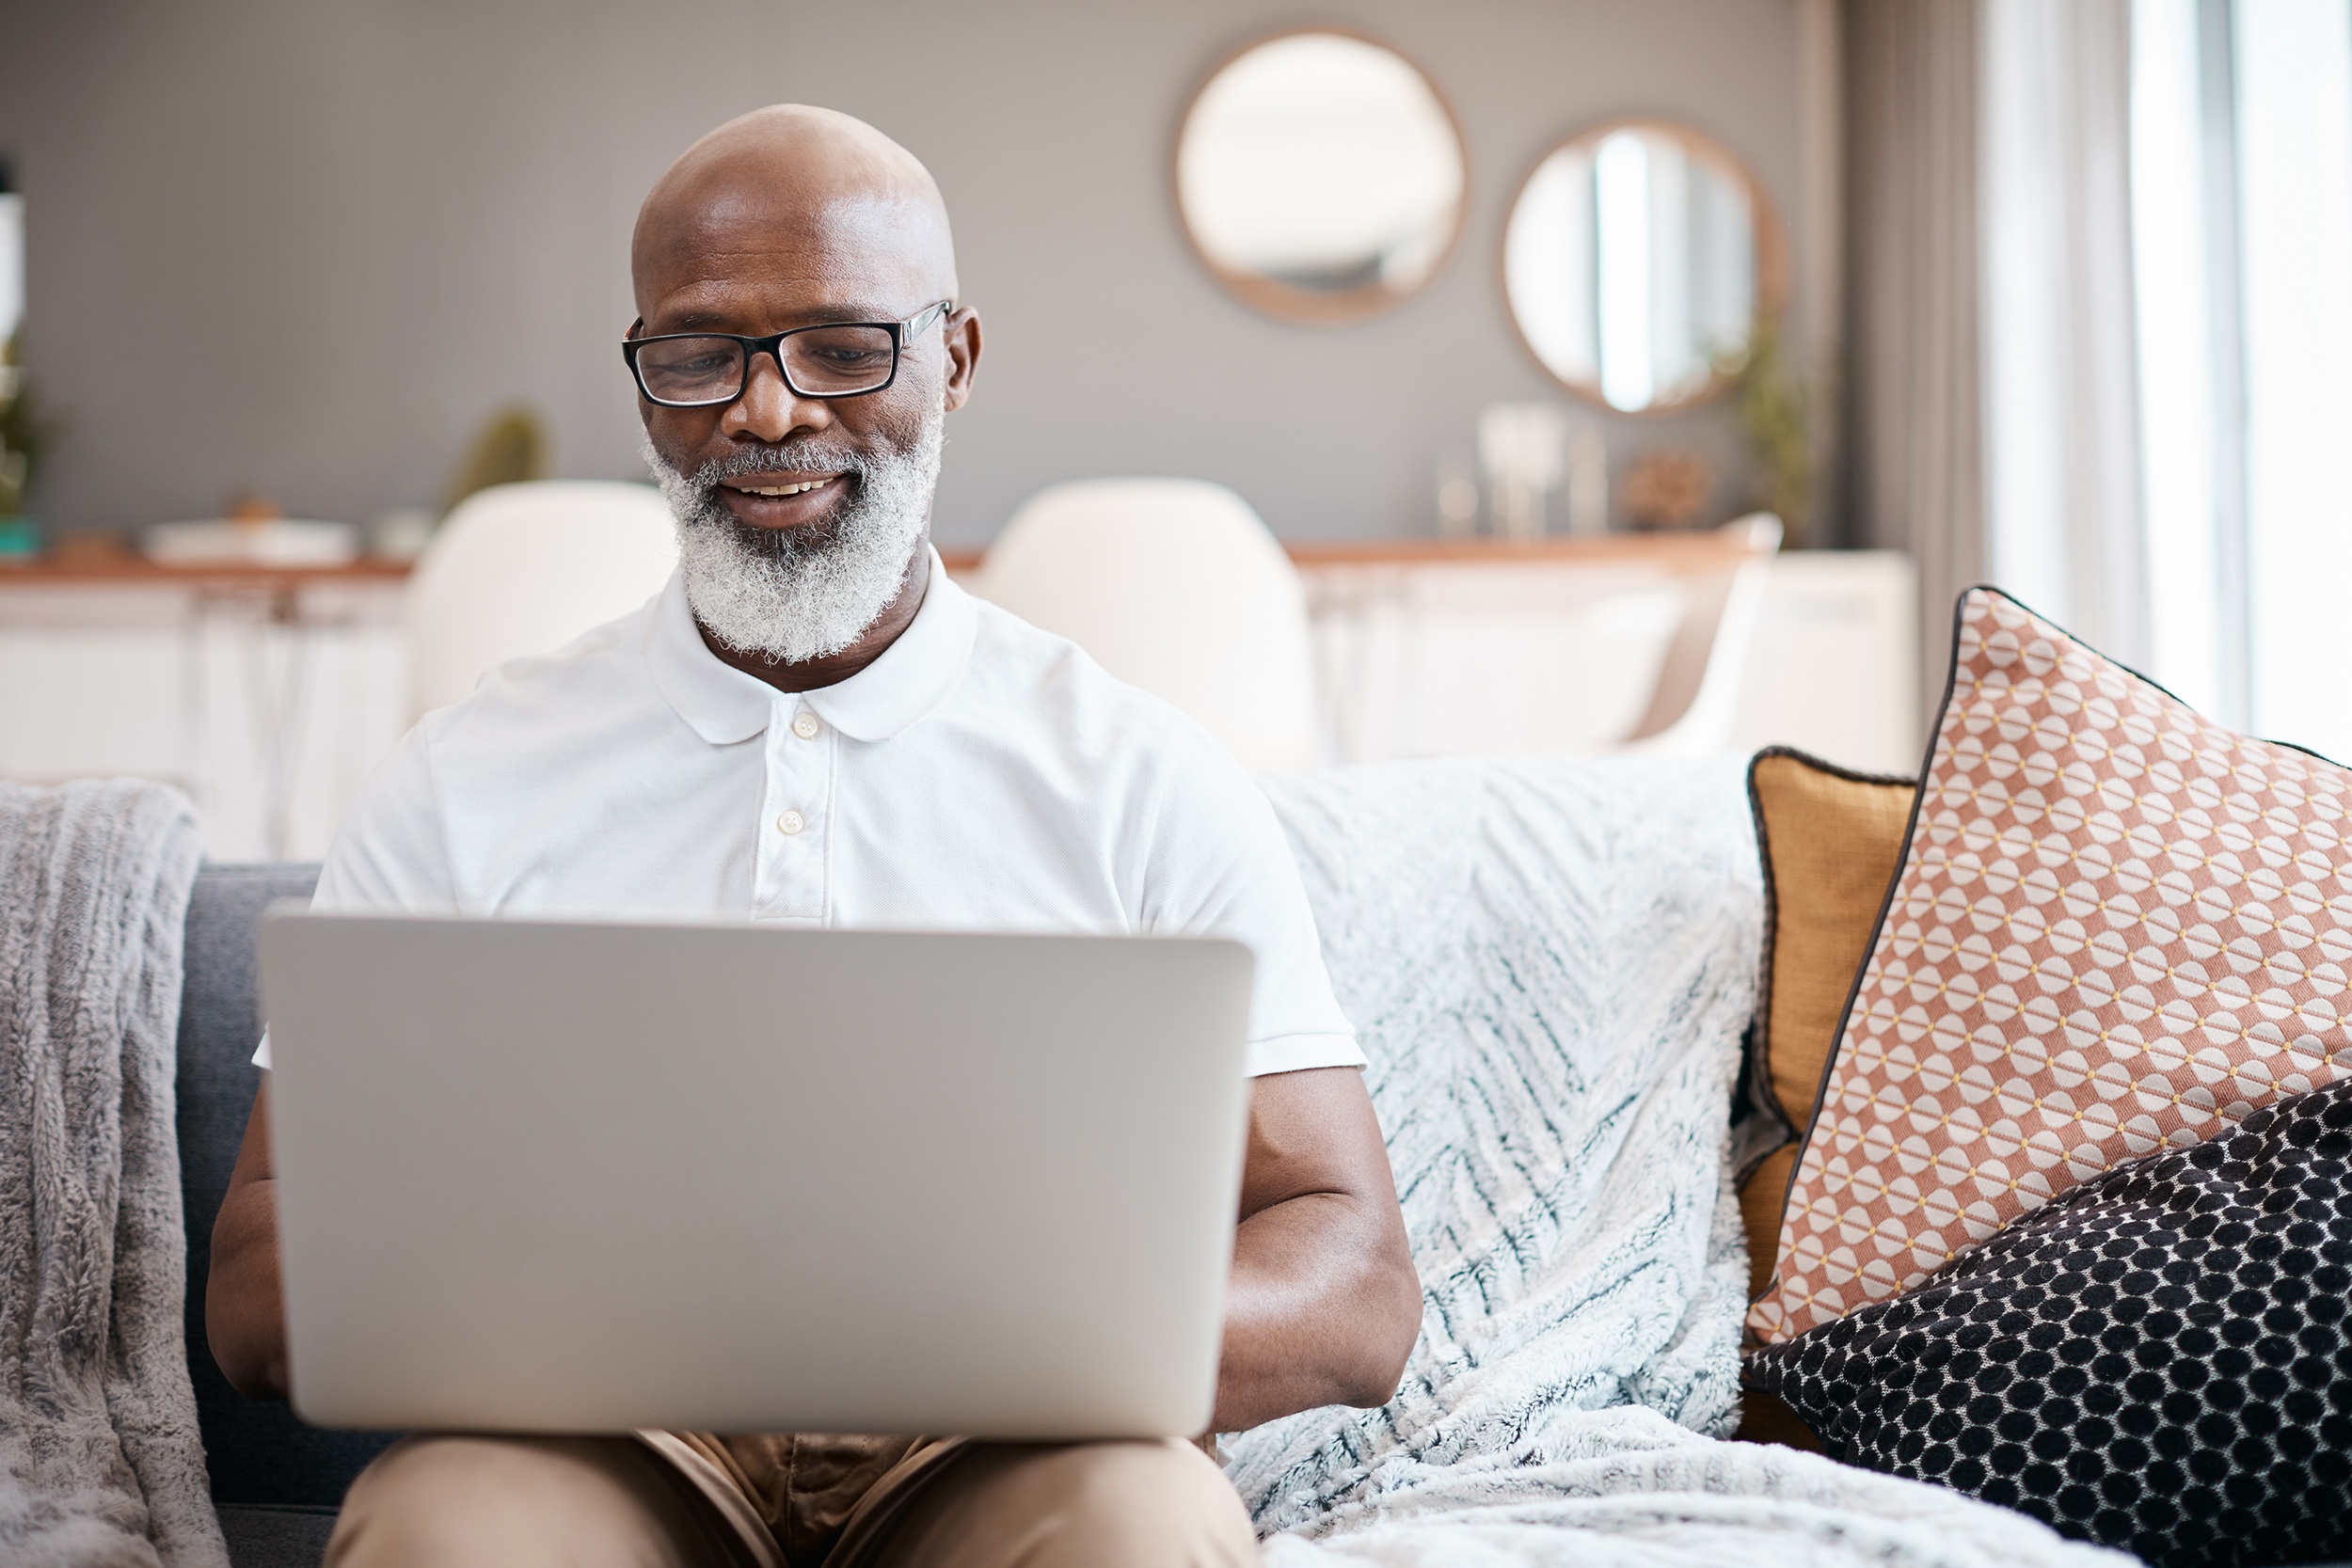 Grinning while he looks at the screen, man sites on a couch typing on his laptop. Troutman & Troutman disability lawyers answer questions about disability benefits every day.